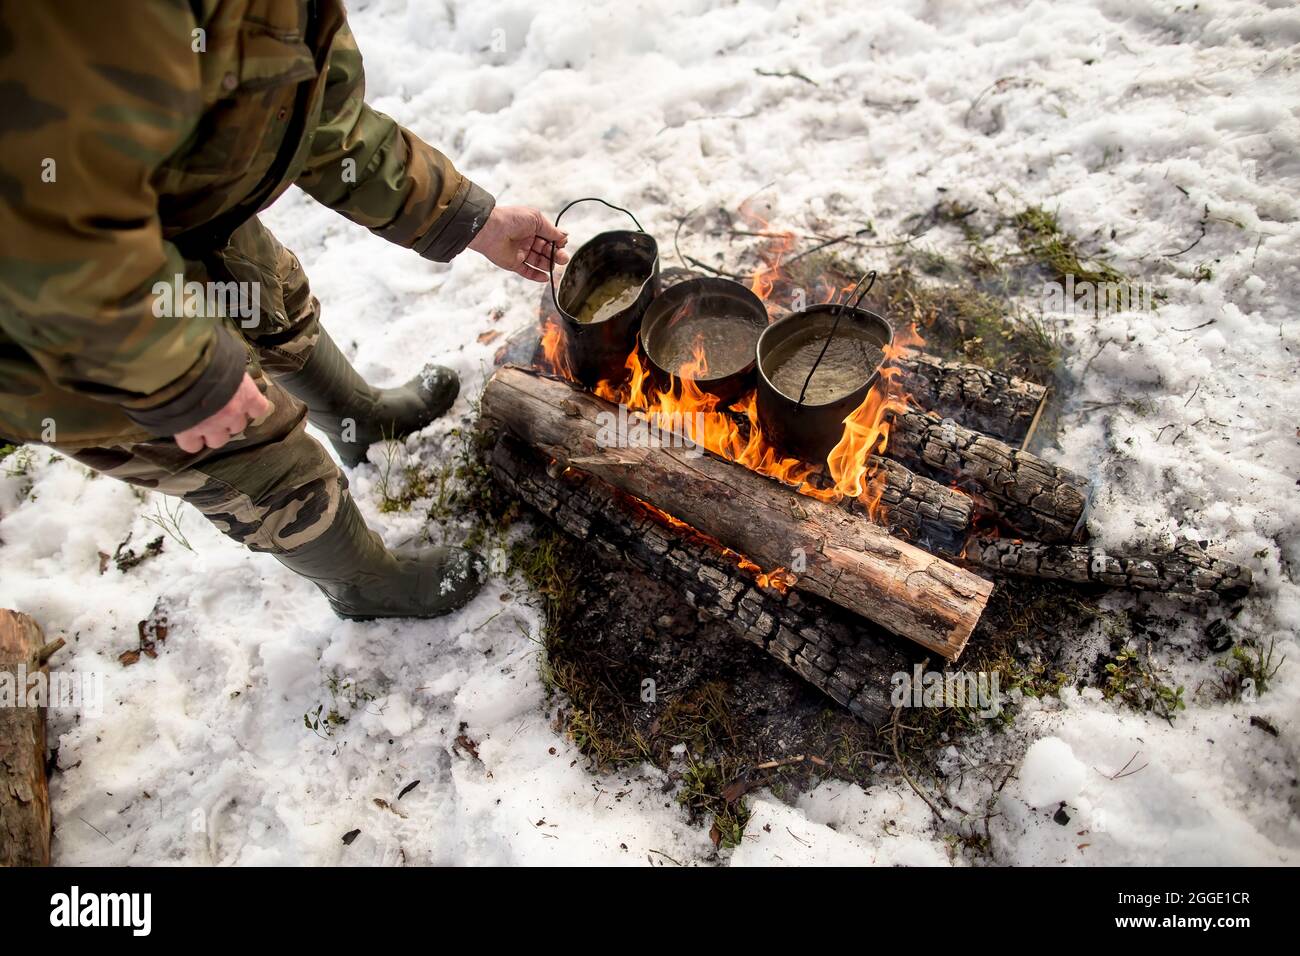 https://c8.alamy.com/comp/2GGE1CR/three-pots-with-boiling-water-on-a-campfire-a-man-in-warm-clothes-is-standing-next-to-him-on-a-winter-day-cooking-on-the-hike-2GGE1CR.jpg